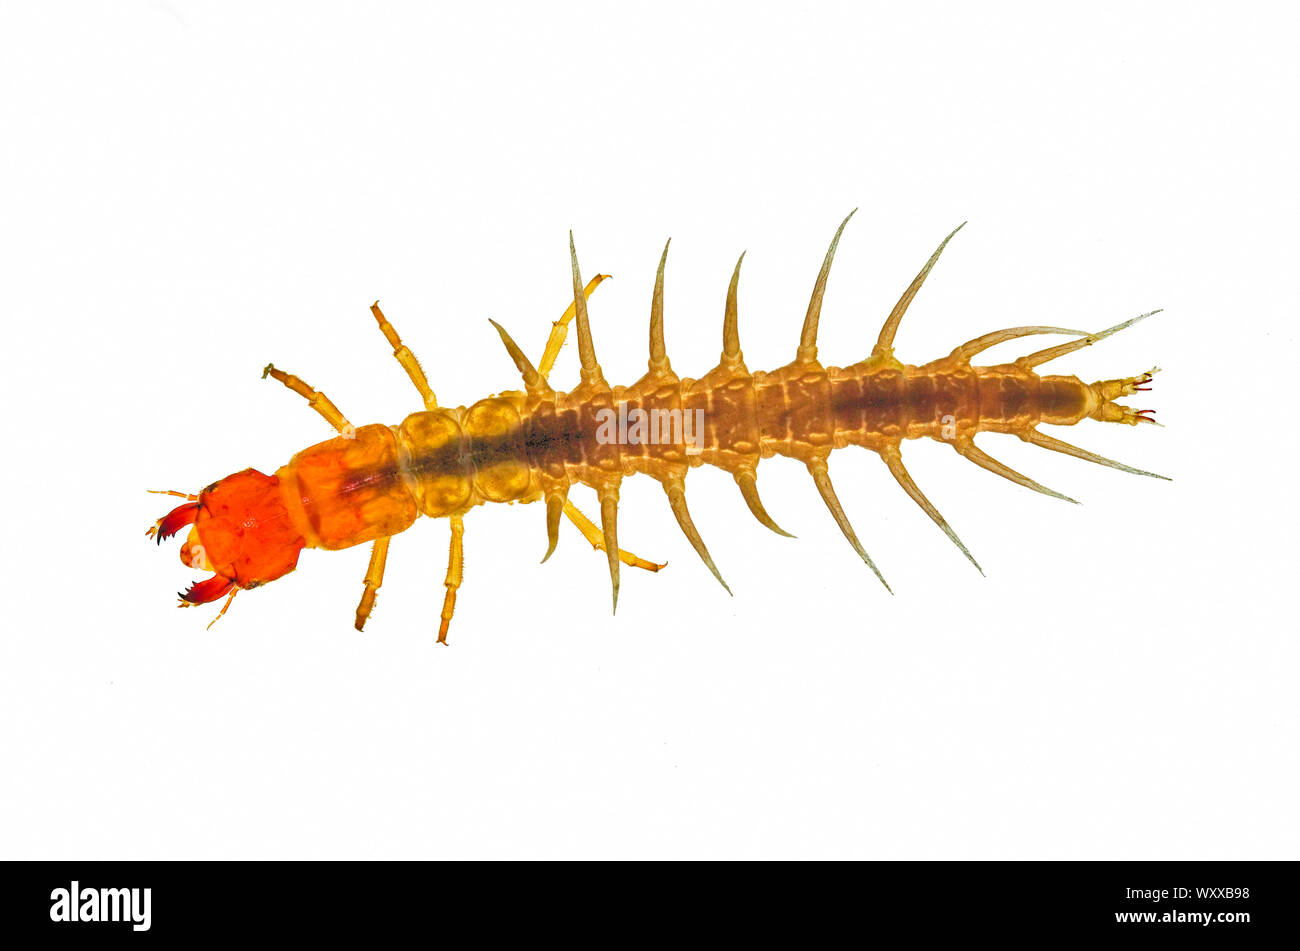 Aquatic, larval stage of a dobsonfly, also known as a hellgrammite, Shasta County, CA USA. Stock Photo